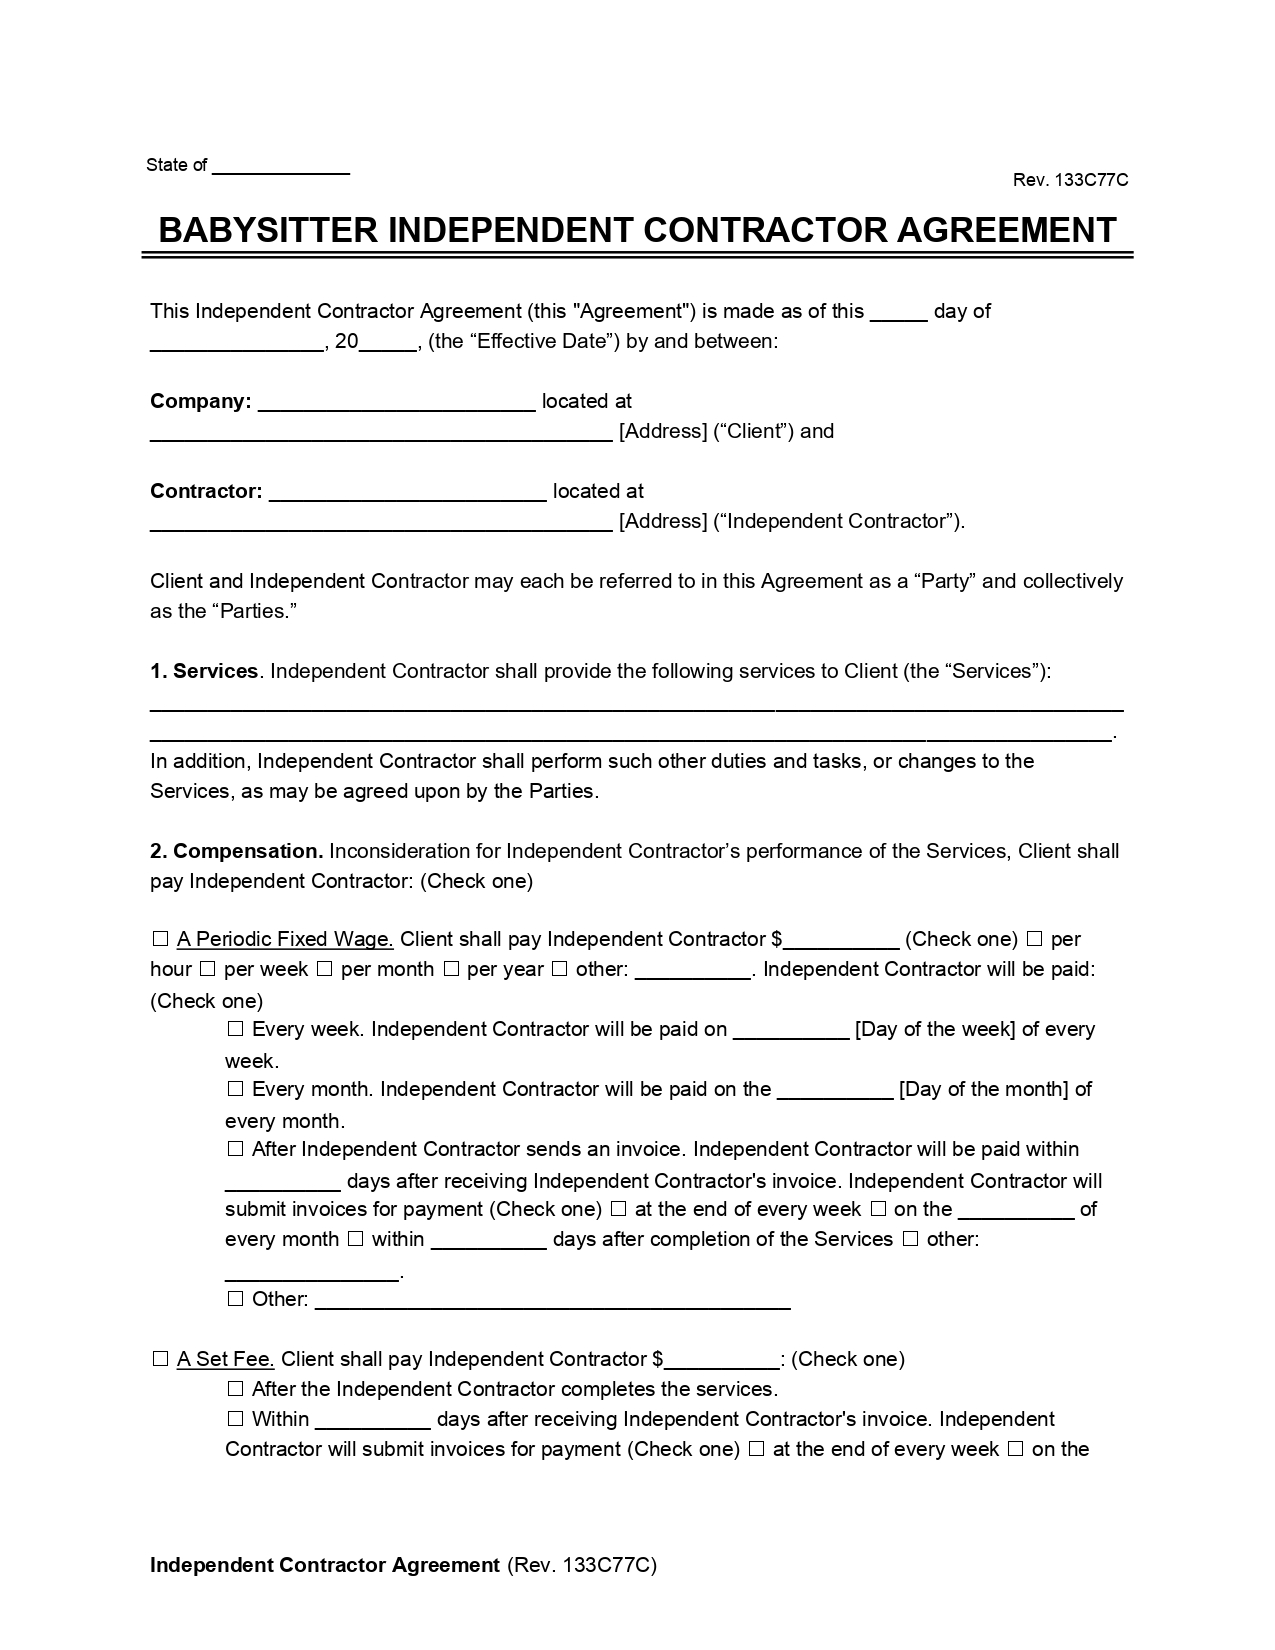 Babysitter Independent Contractor Agreement